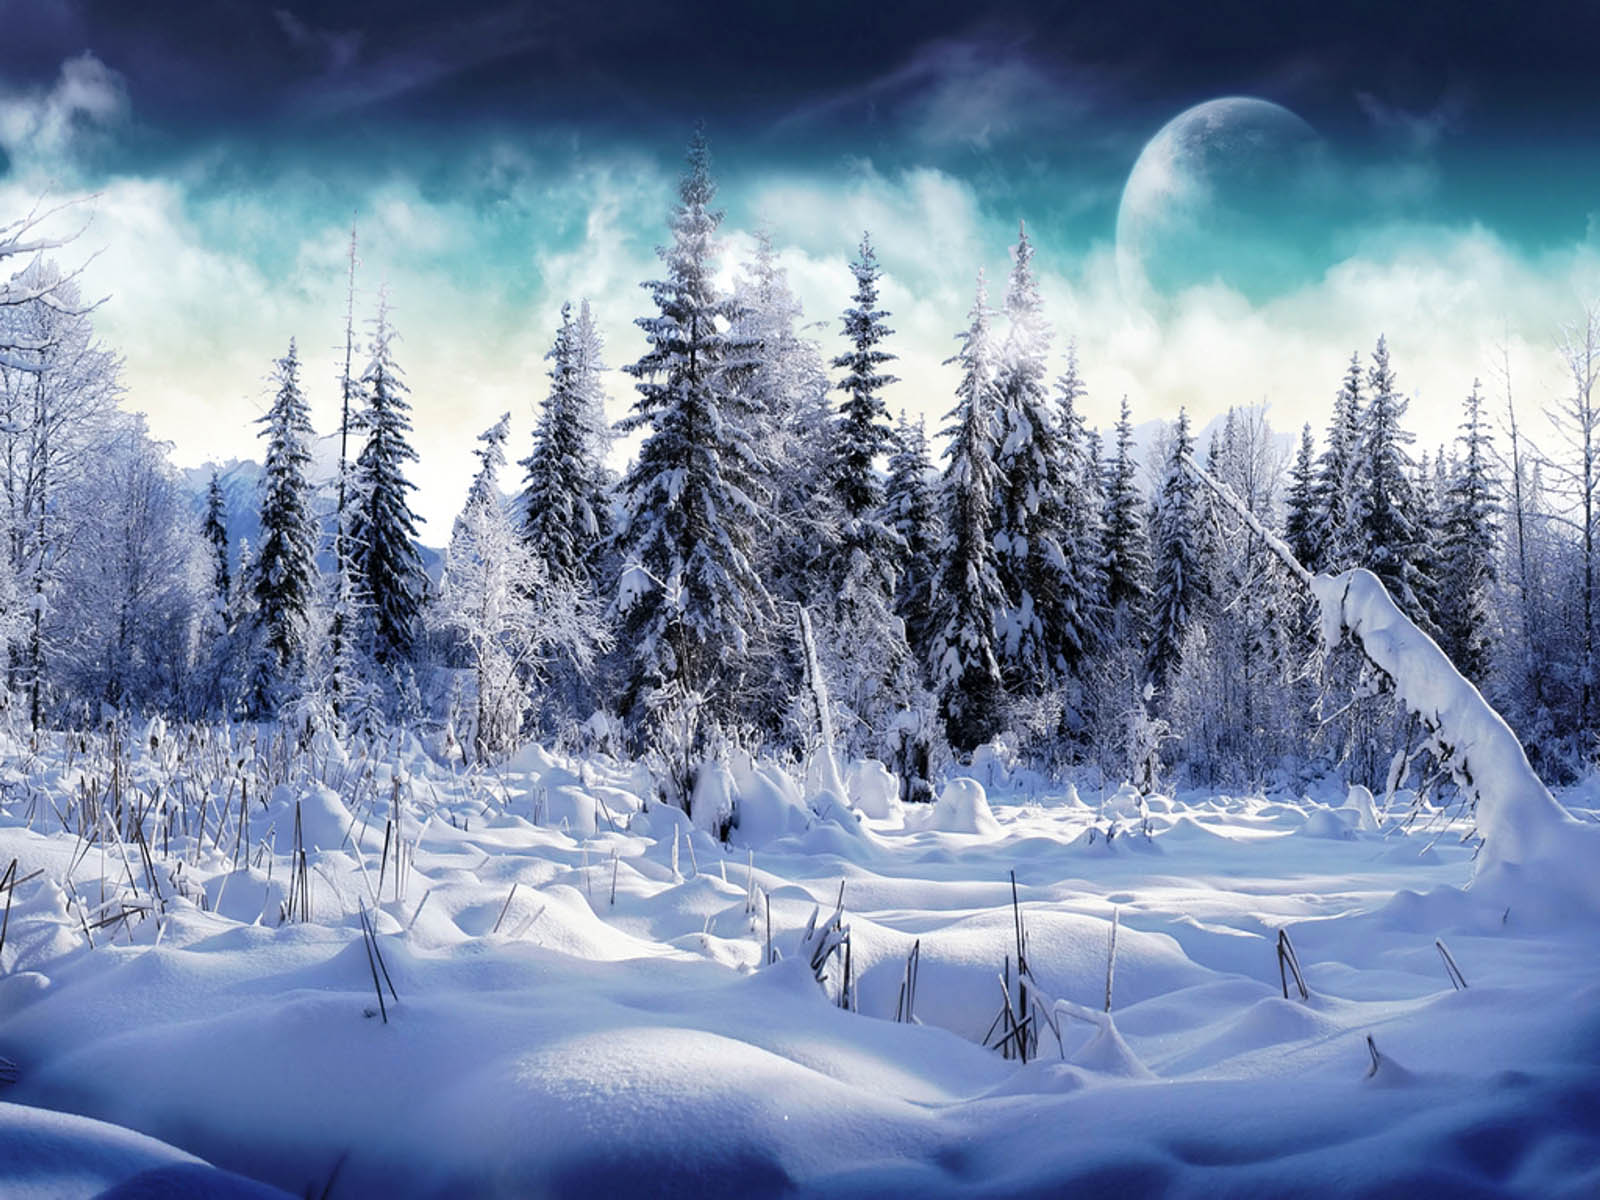 Wallpaper winter forest snow trees the snow images for desktop section  пейзажи  download